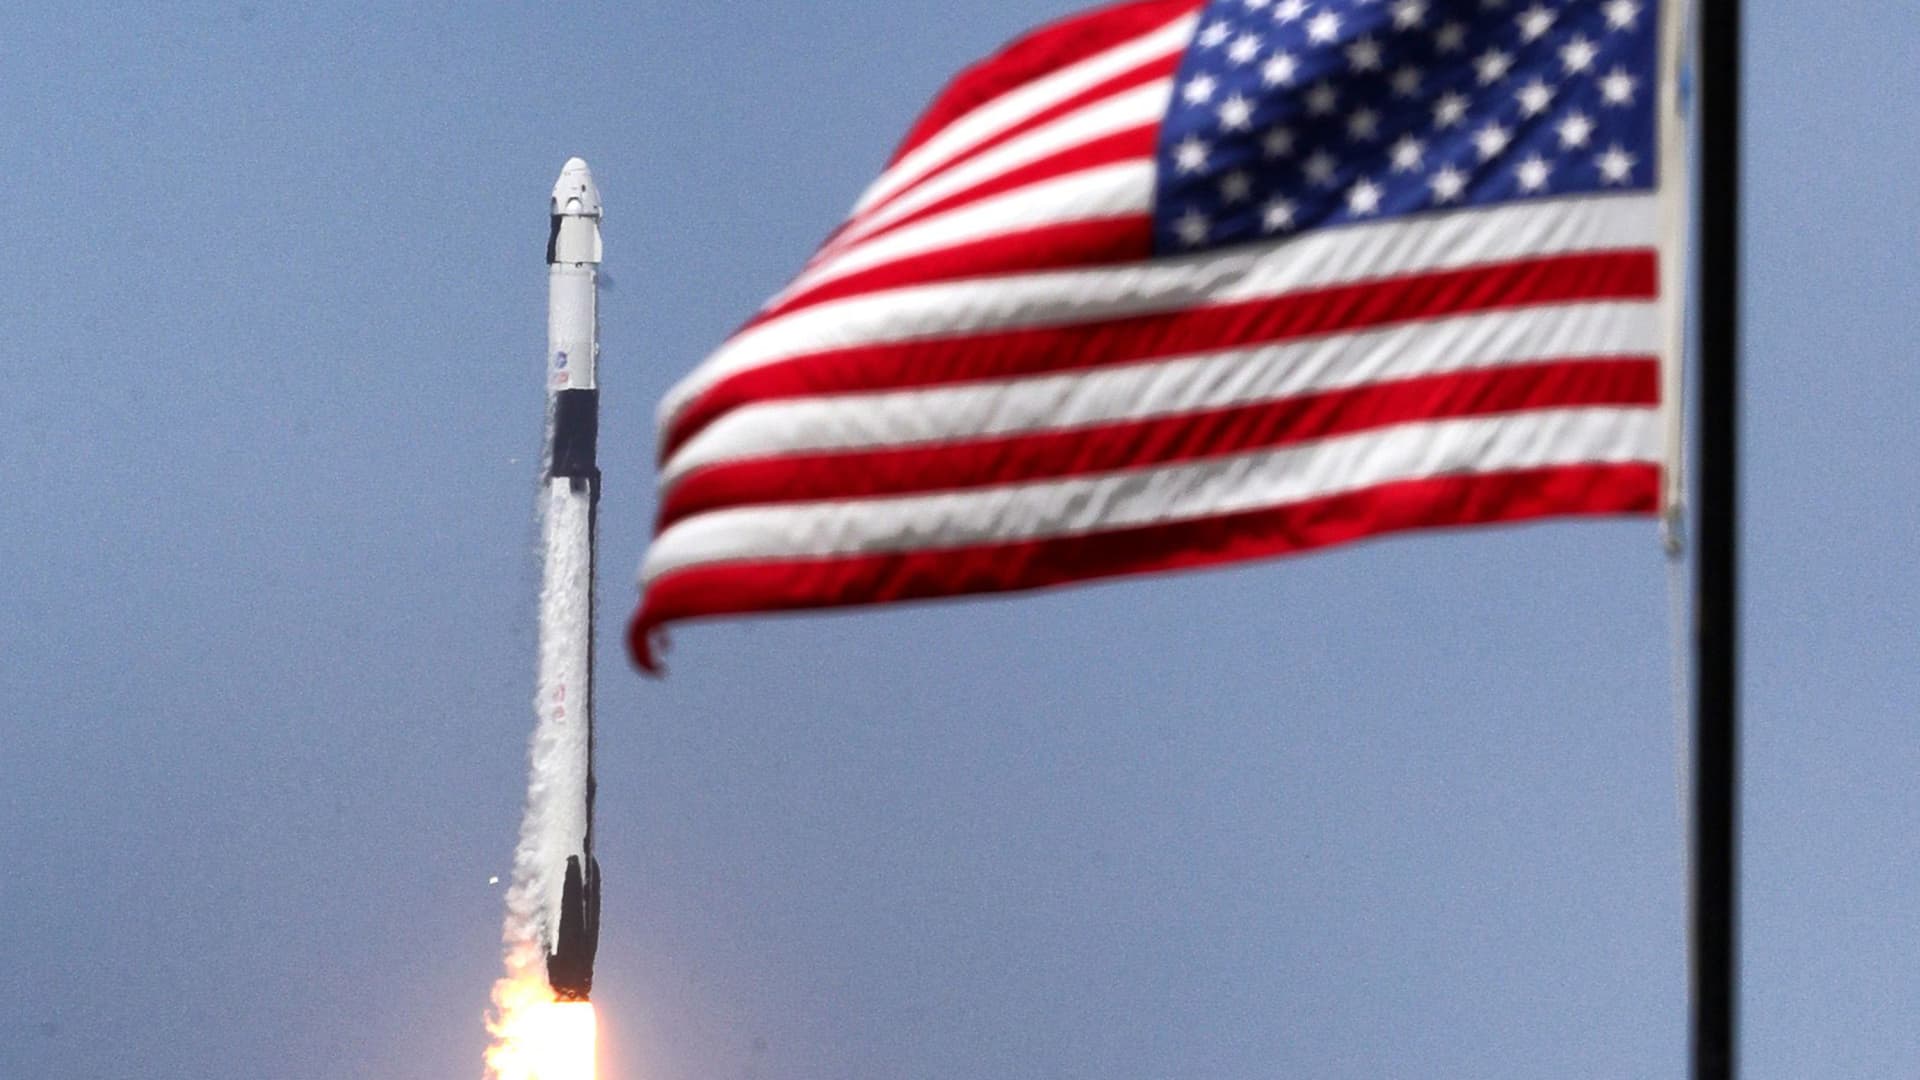 NASA taps SpaceX for 5 more astronaut missions, worth .4 billion in contracts